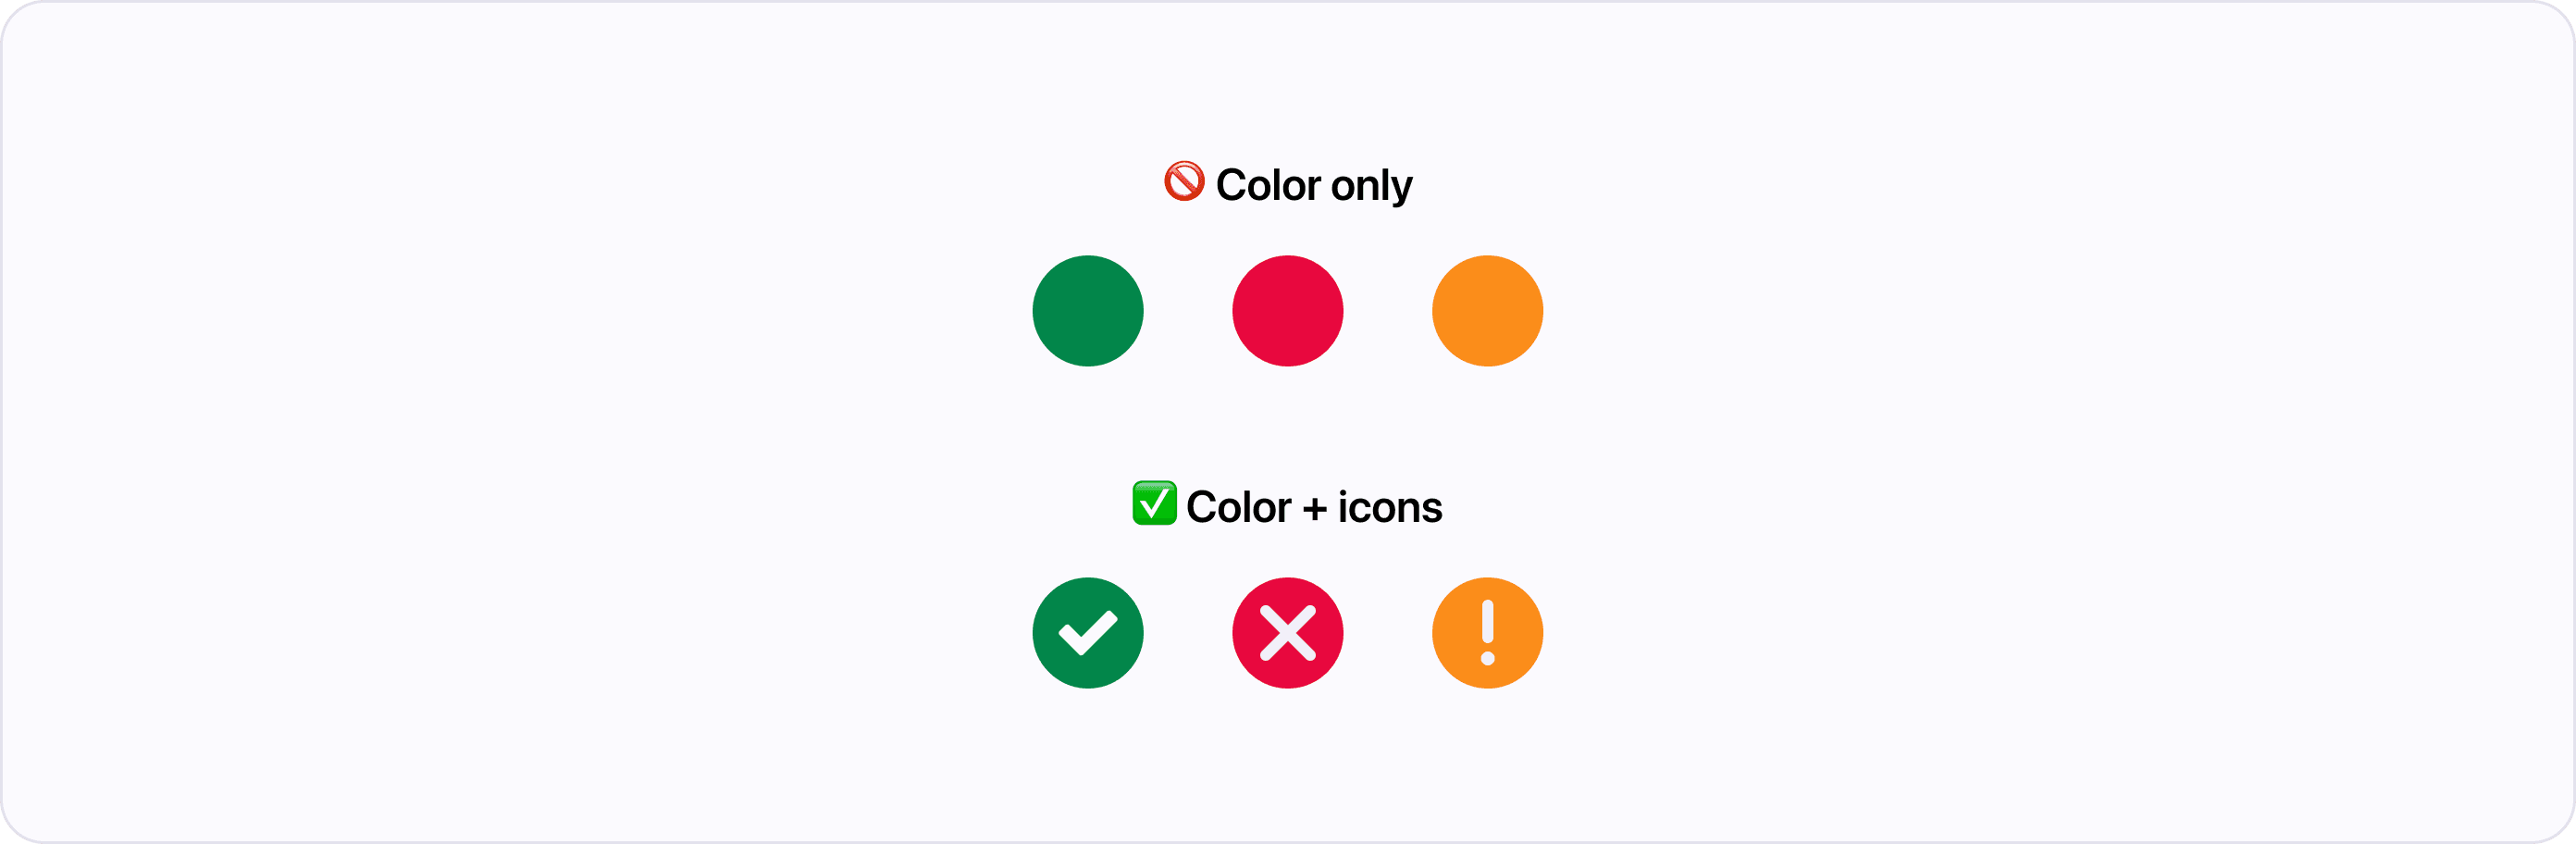 Avoid Using Color as the Only Means of Conveying Information